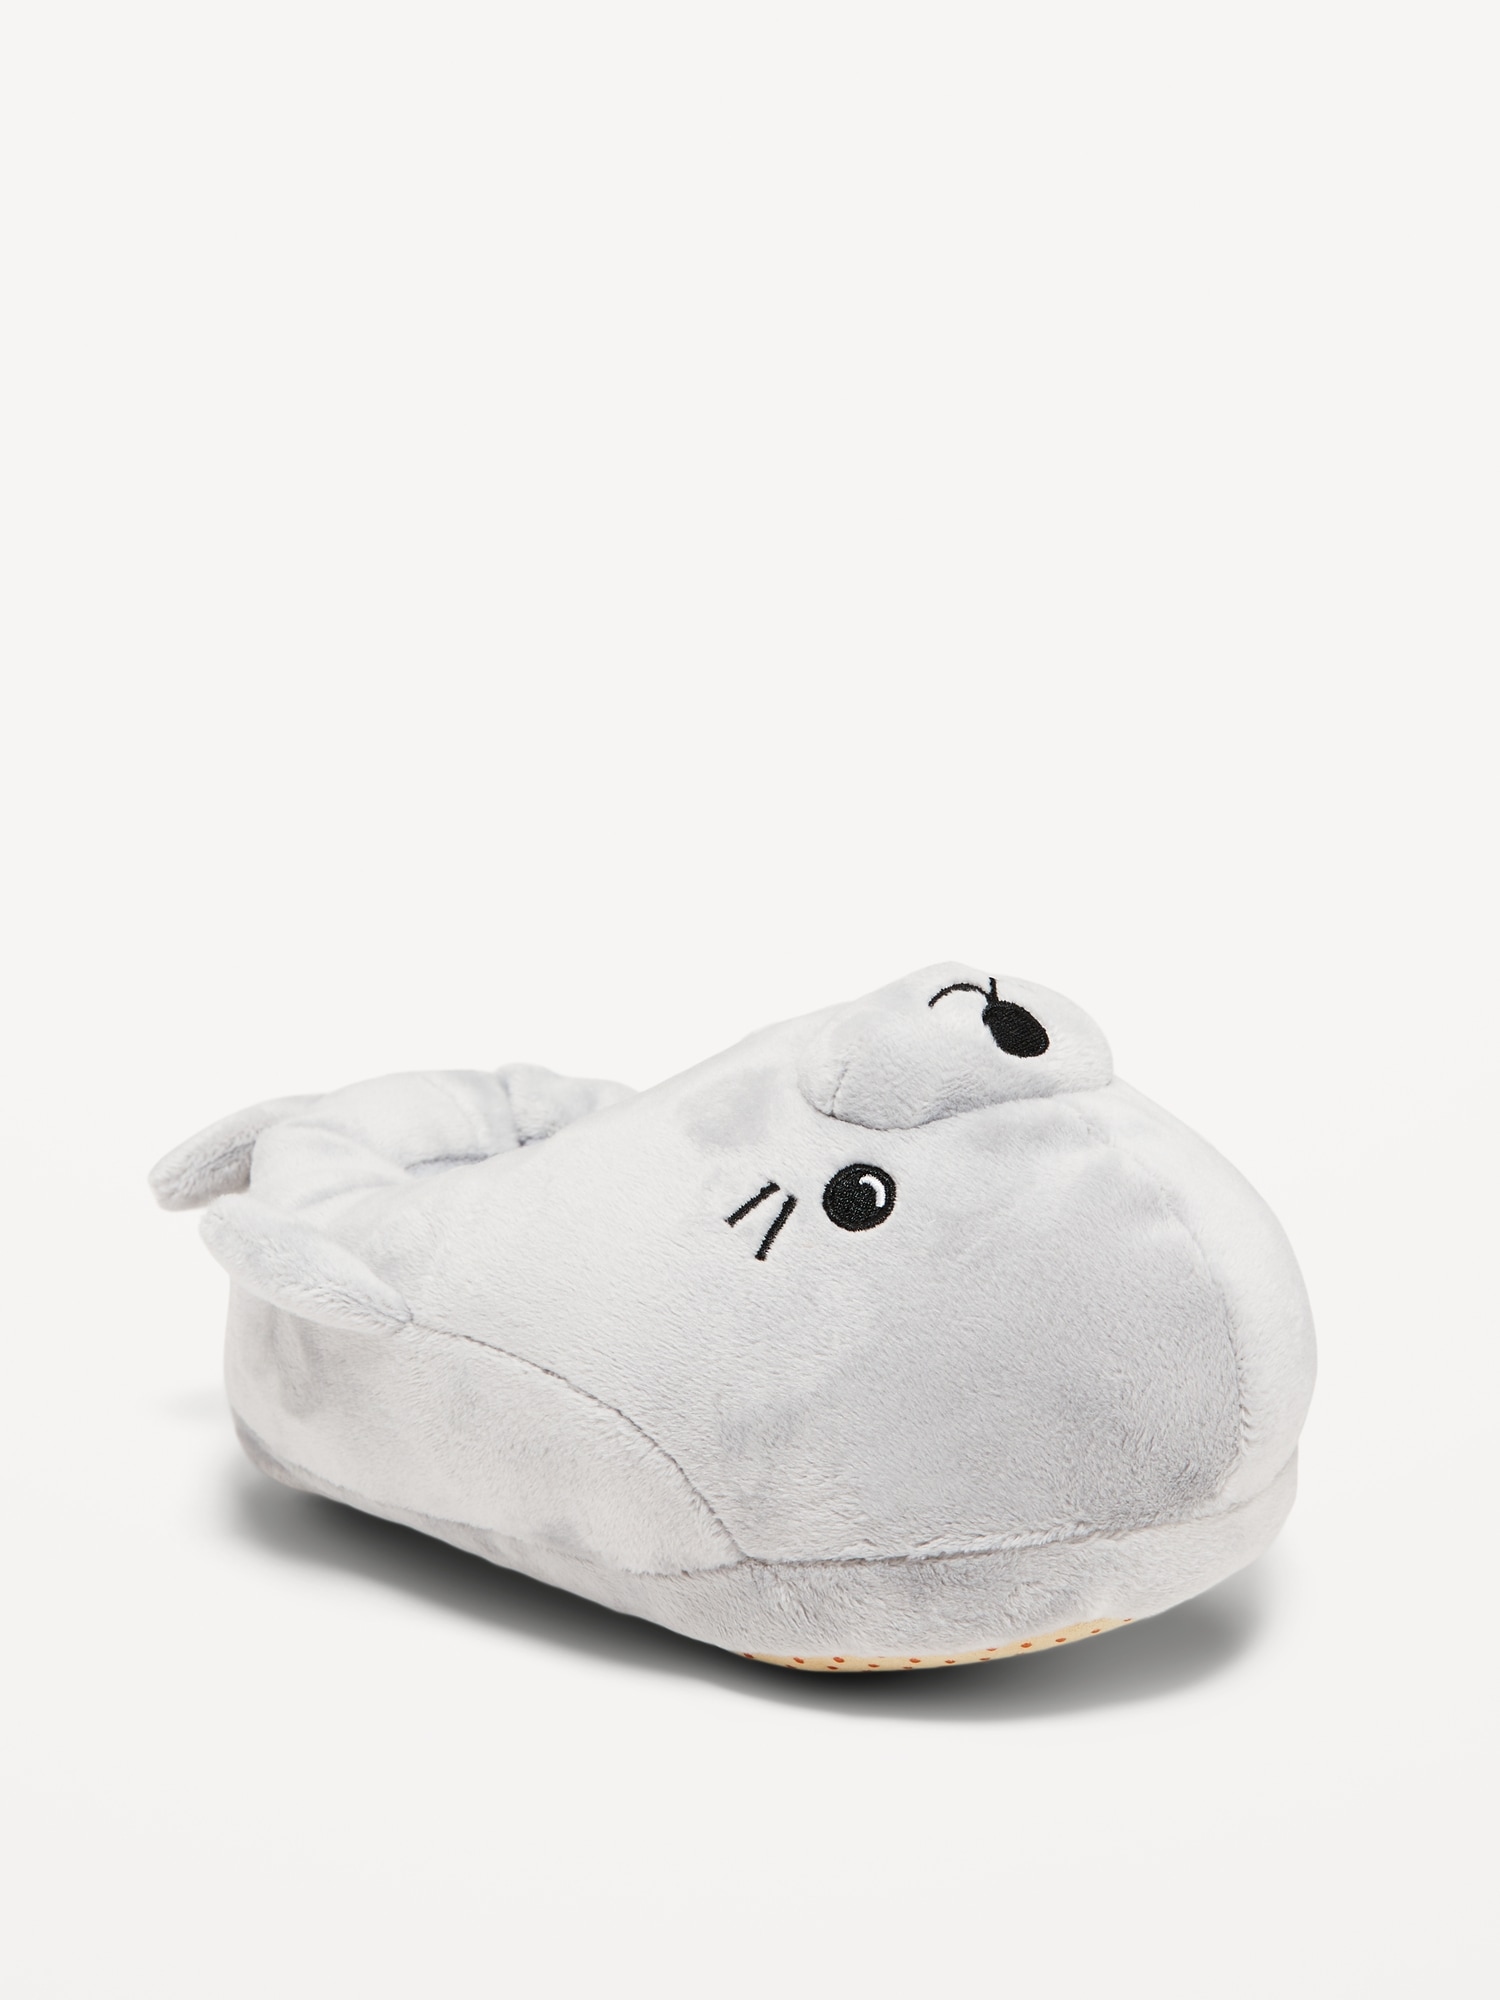 Unisex Faux-Fur Critter Slippers for Toddler | Old Navy